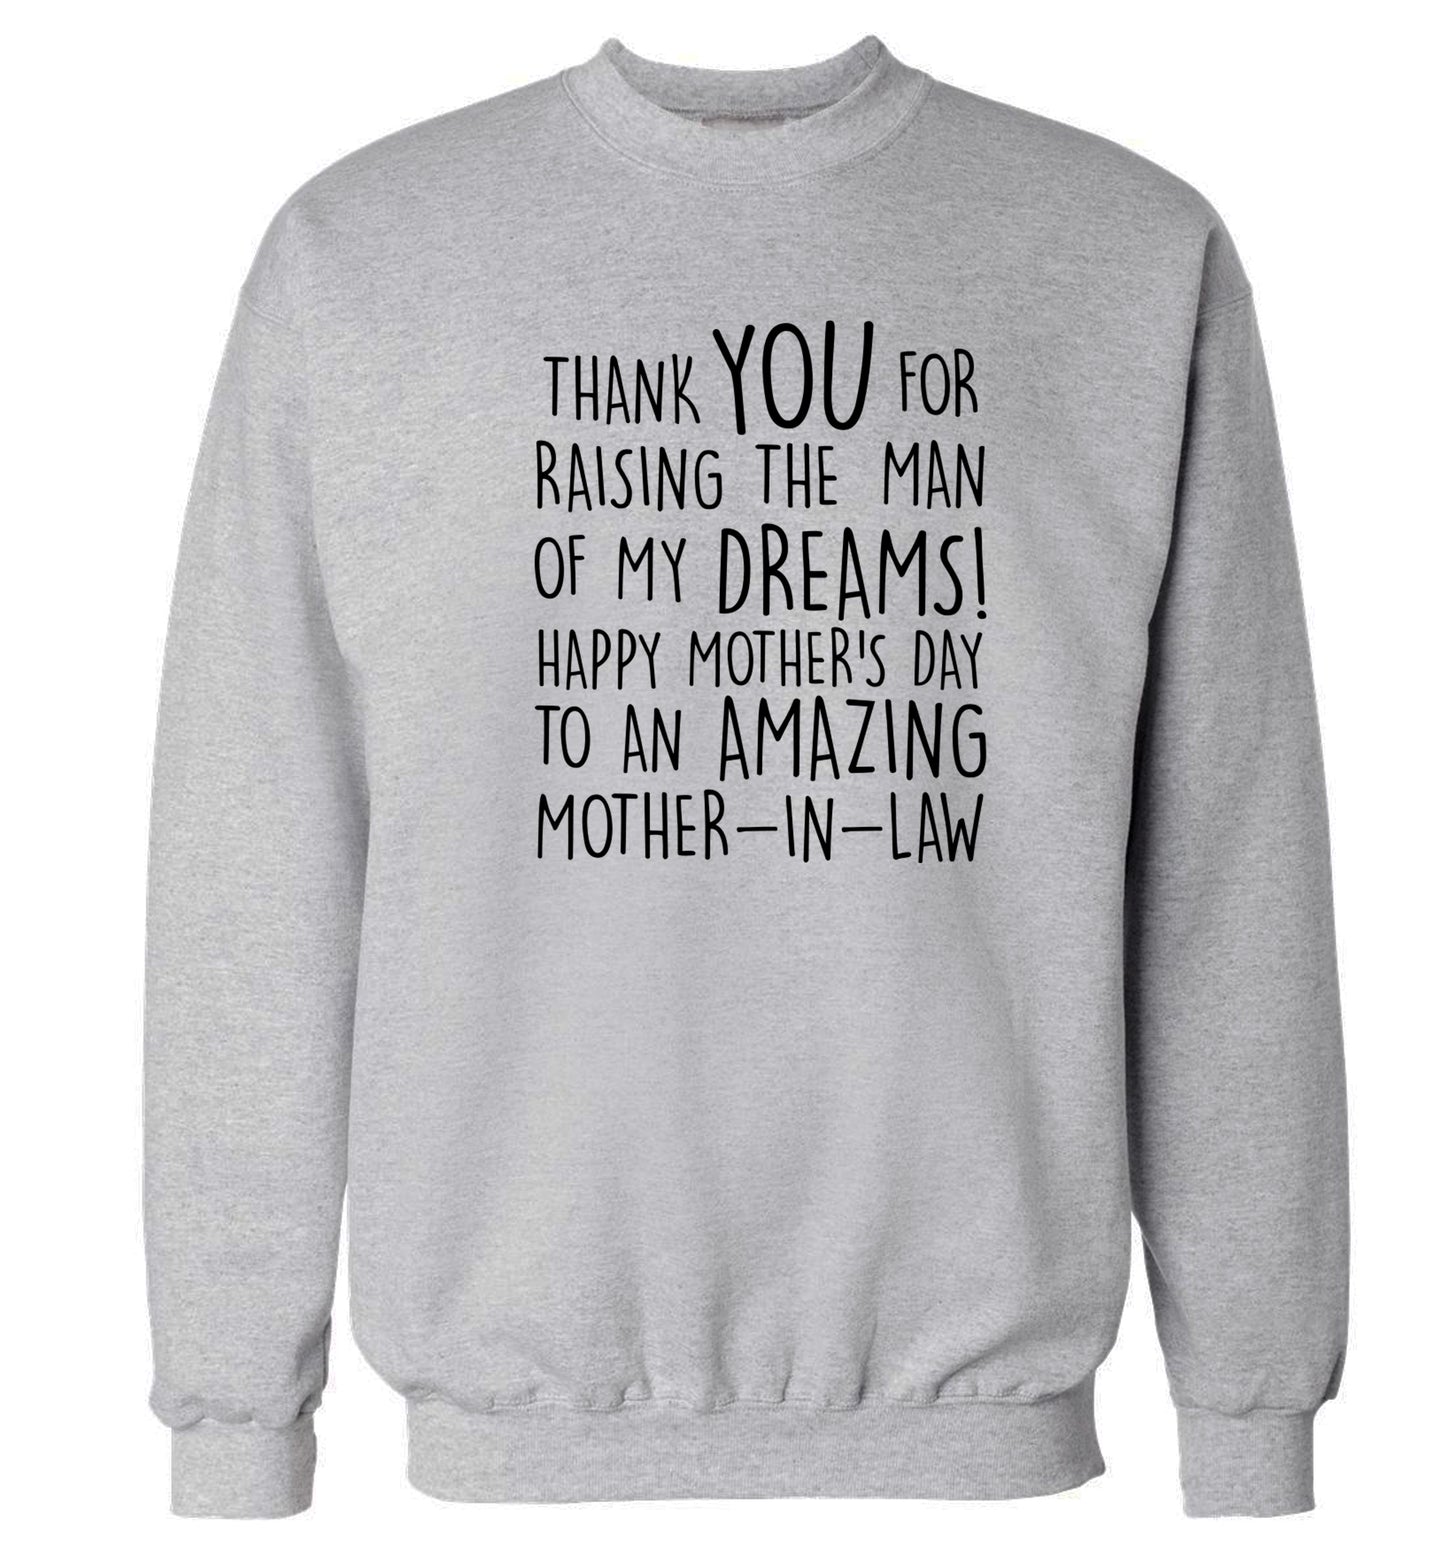 Thank you for raising the man of my dreams happy mother's day mother-in-law Adult's unisex grey Sweater 2XL